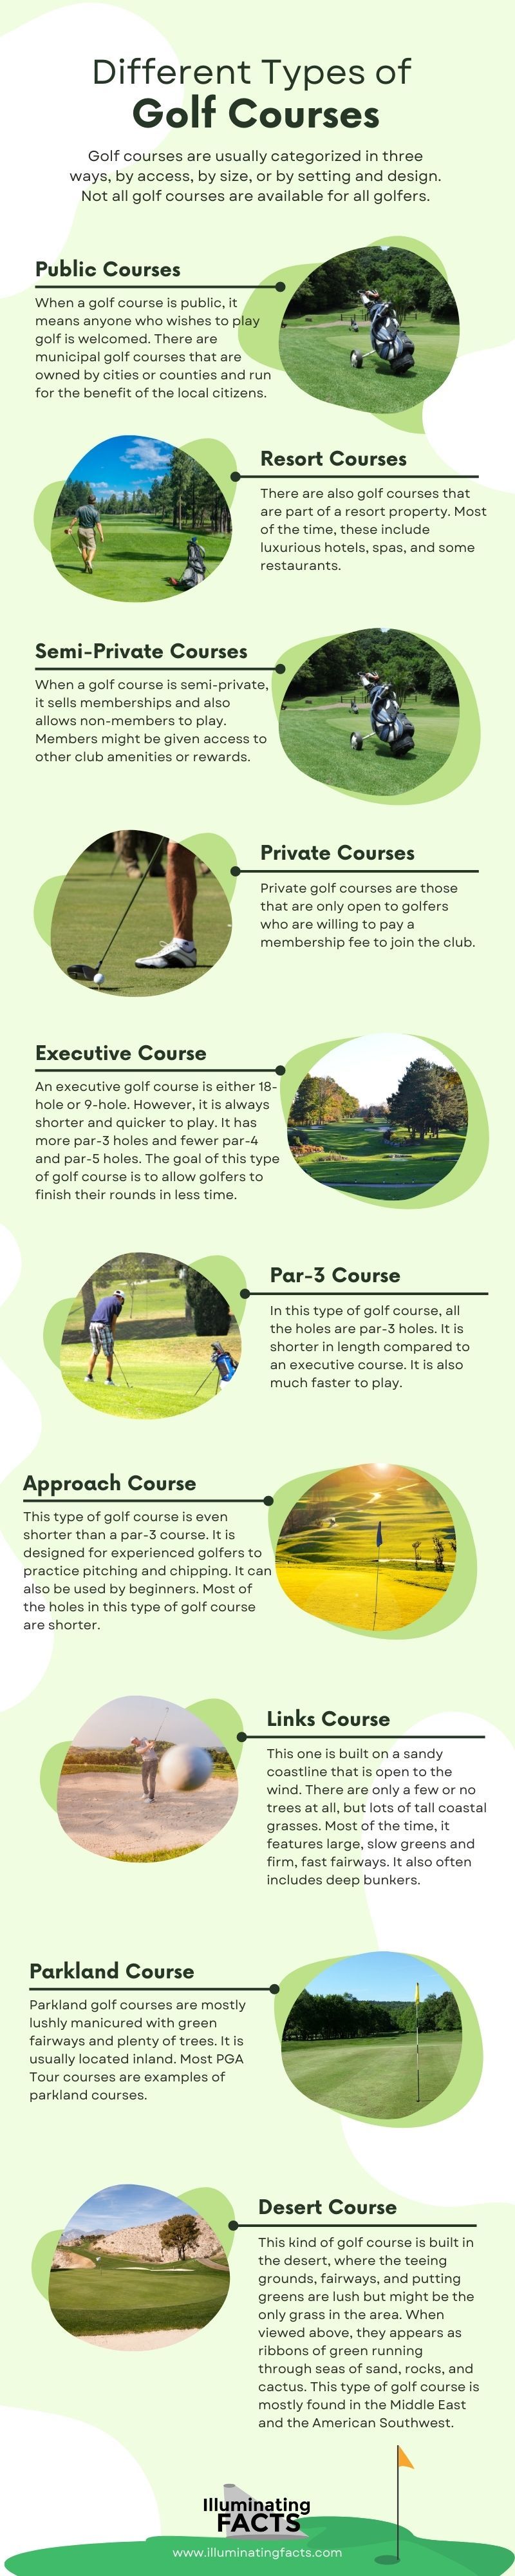 Different Types of Golf Course